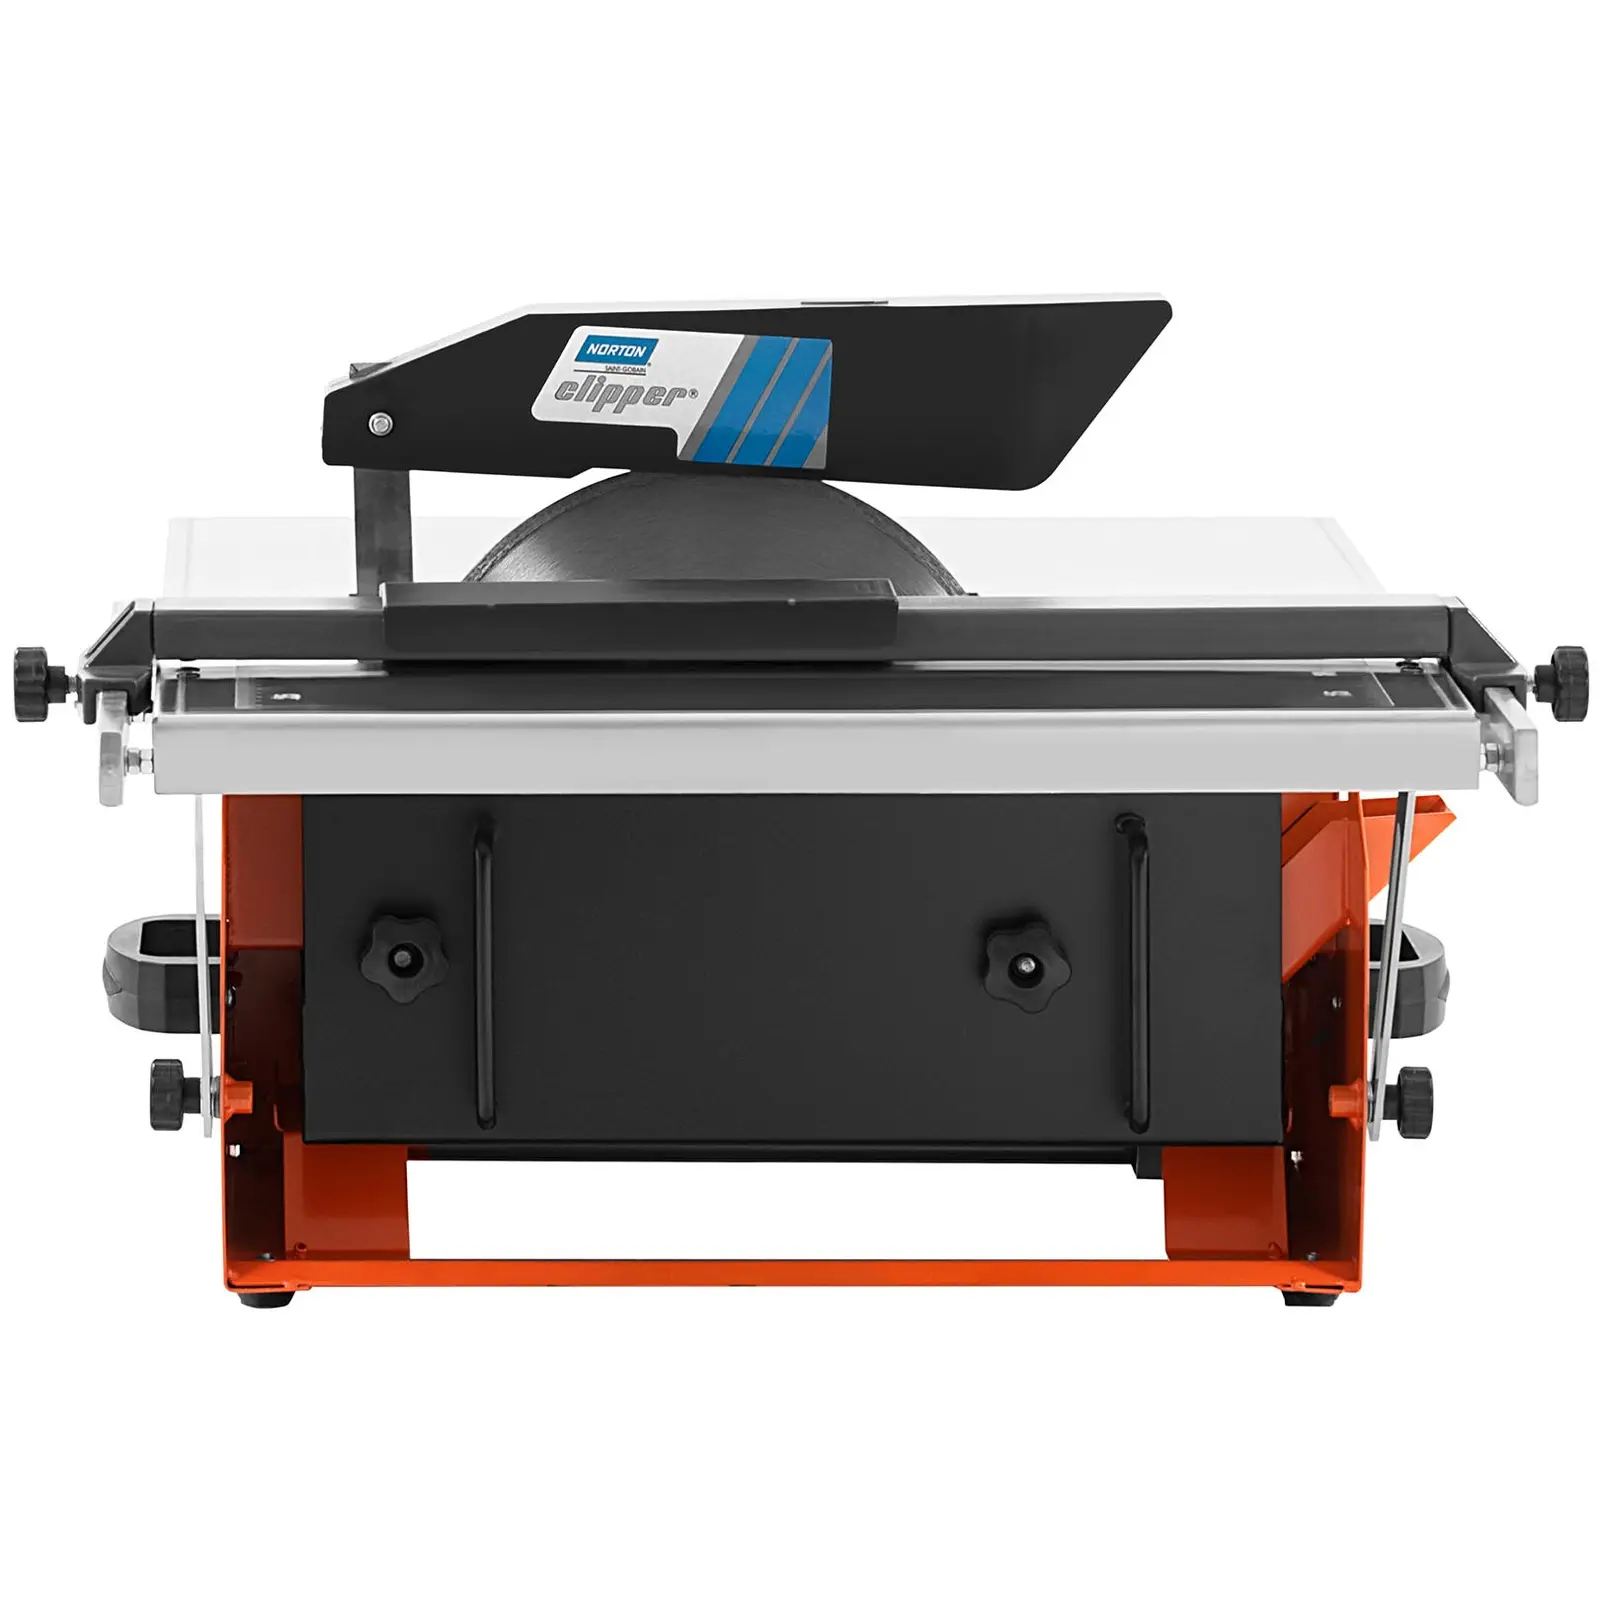 Tile Cutter - 1,000 W - inclinable stainless steel table from 0 - 45° - water-cooled